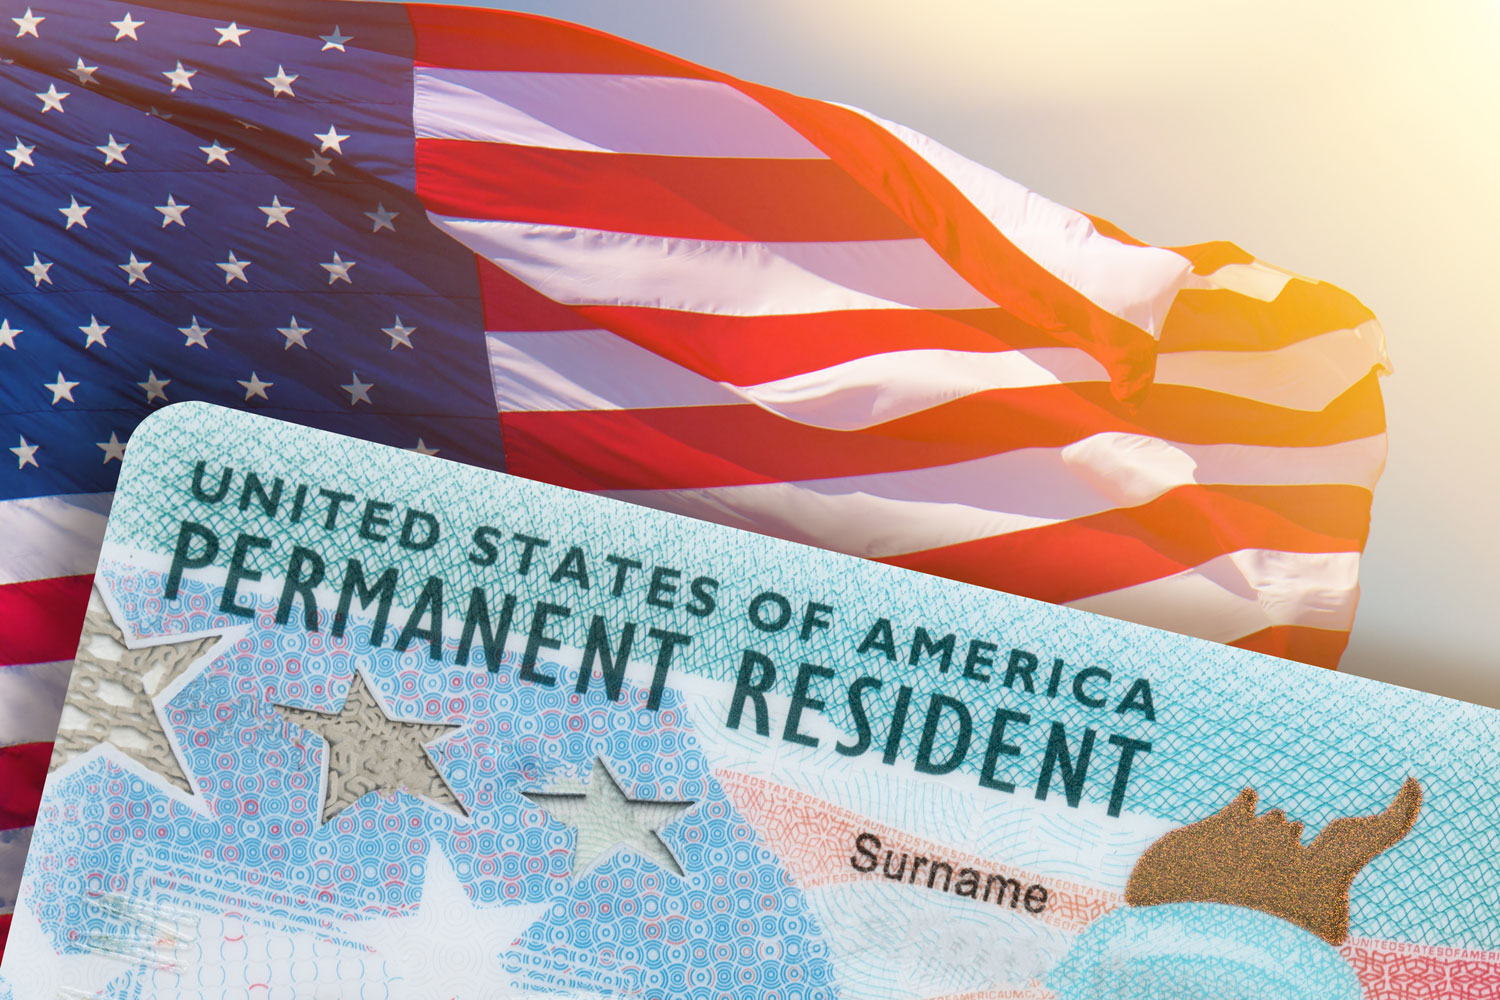 Green Card and American flag on the background